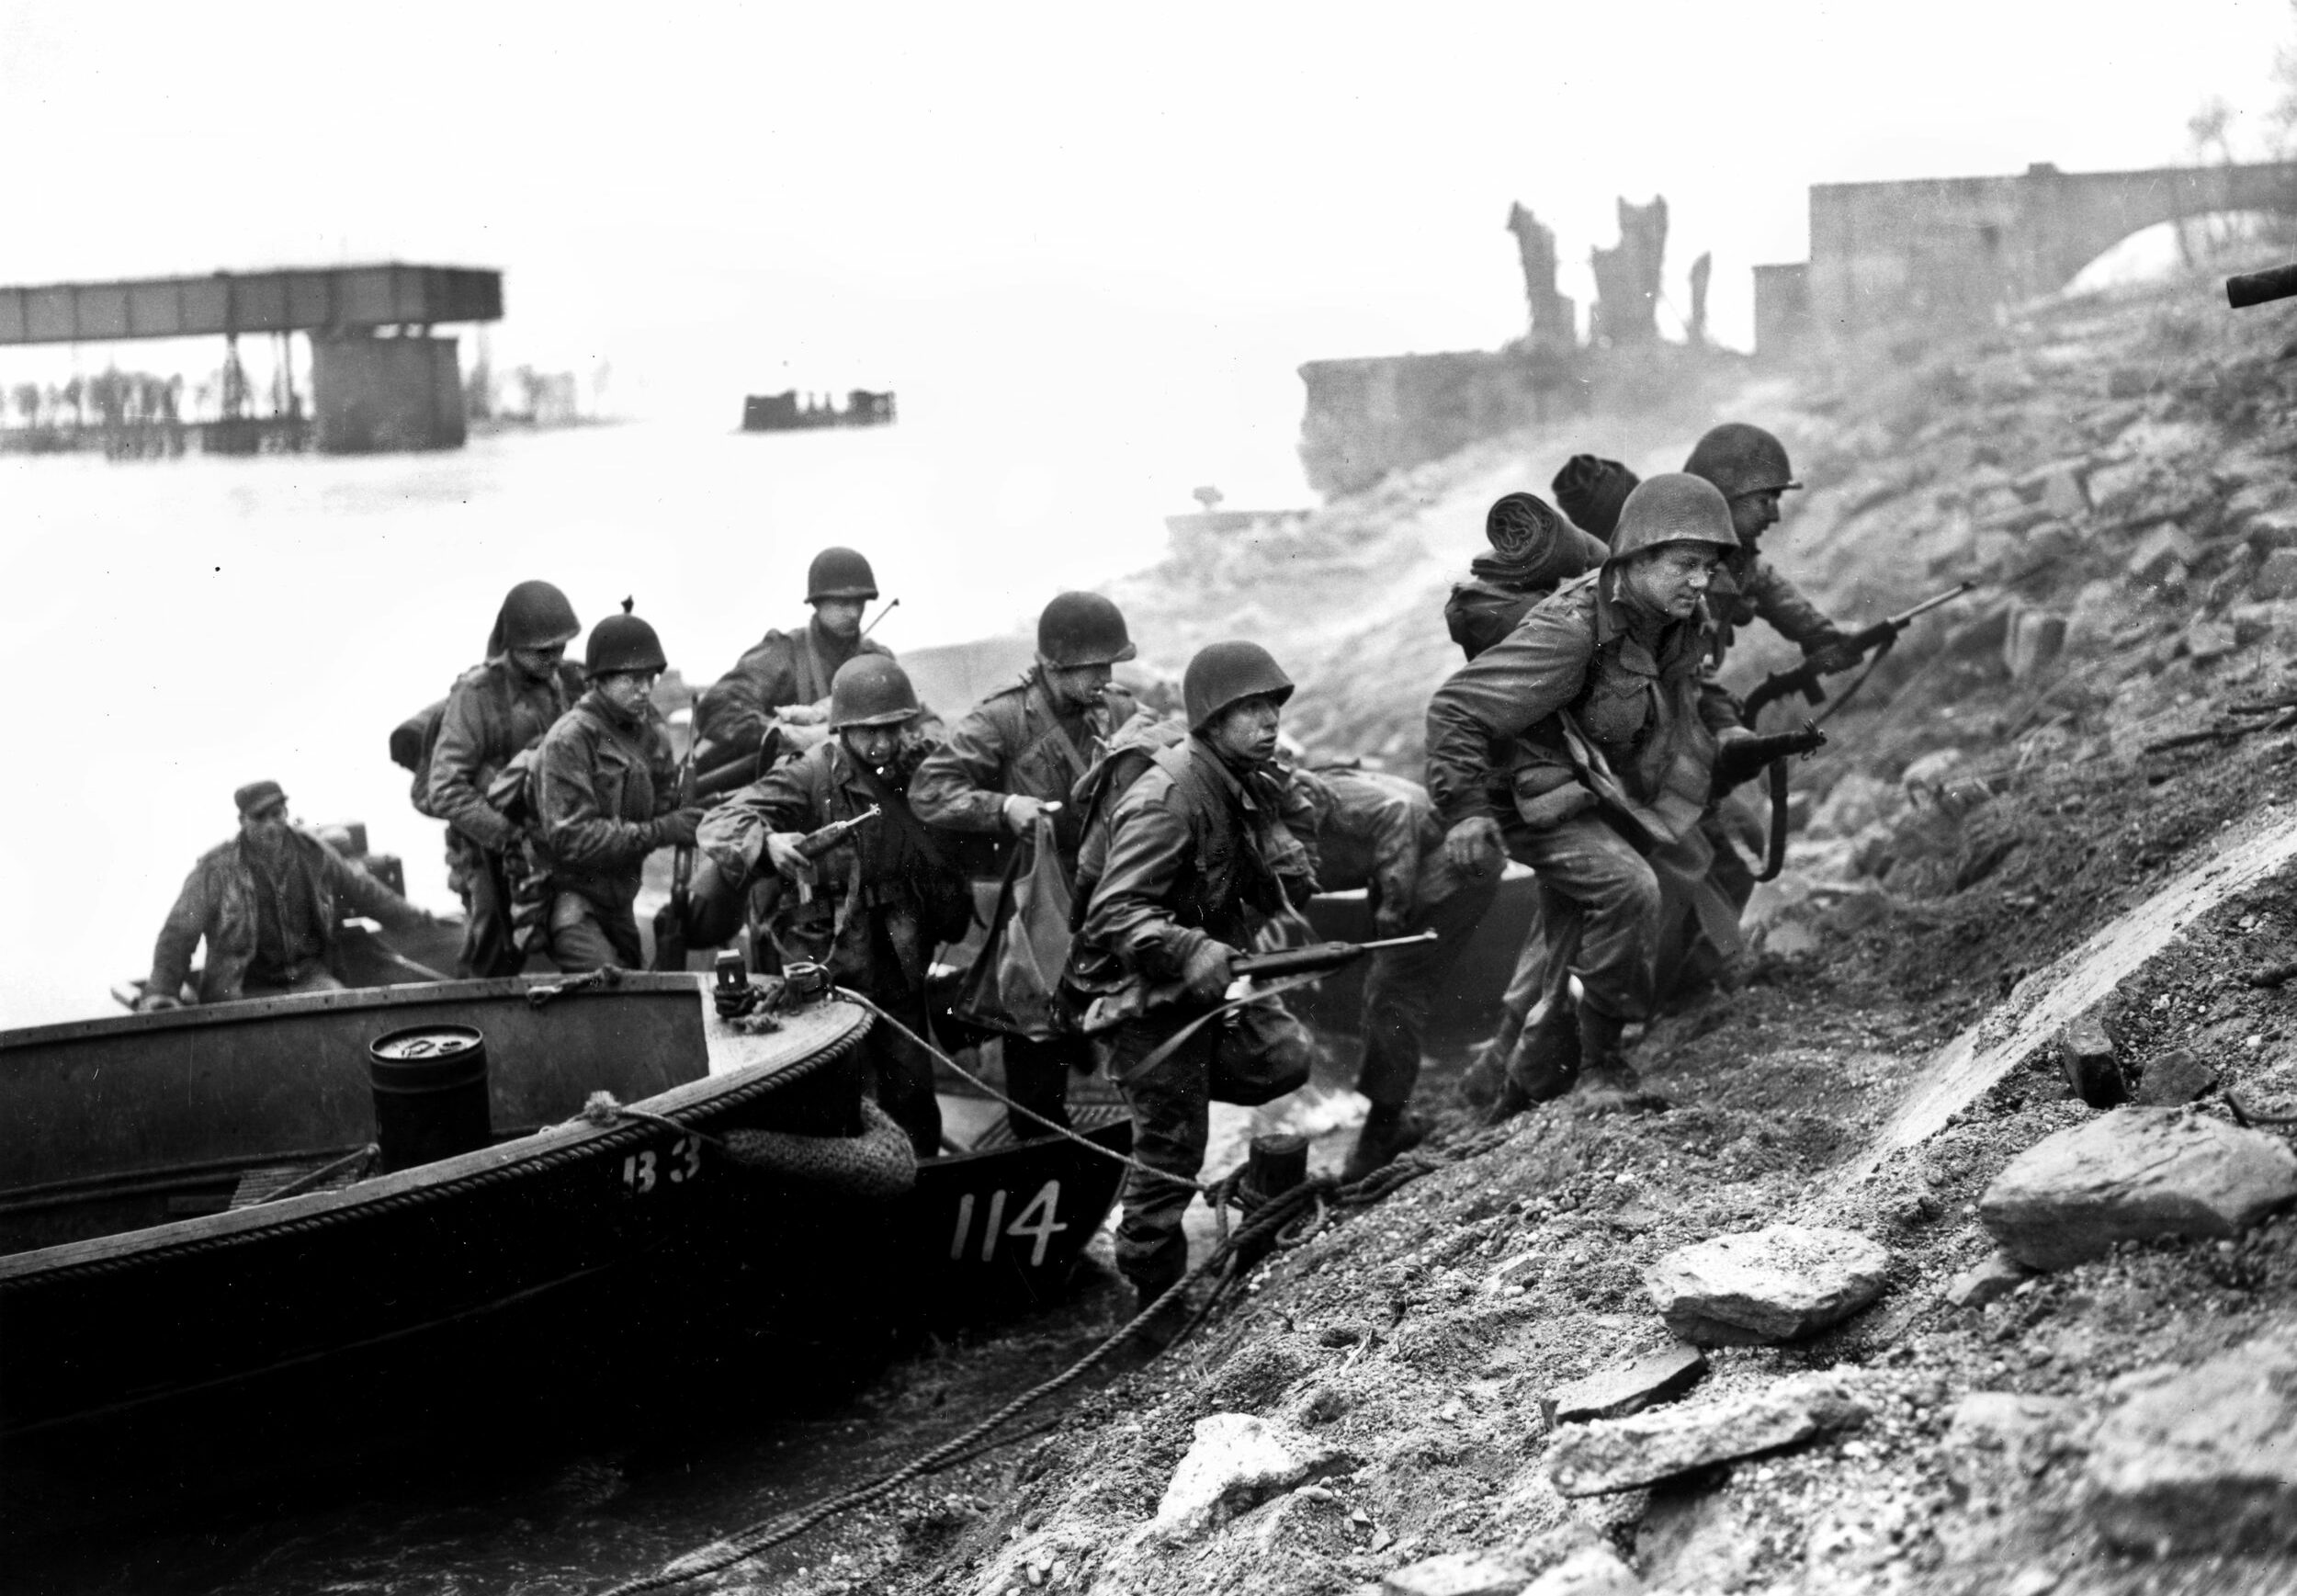 With a destroyed railroad bridge behind them, 3rd Infantry Division troops scramble from their assault boats onto the eastern bank of the river. Enemy opposition varied in intensity